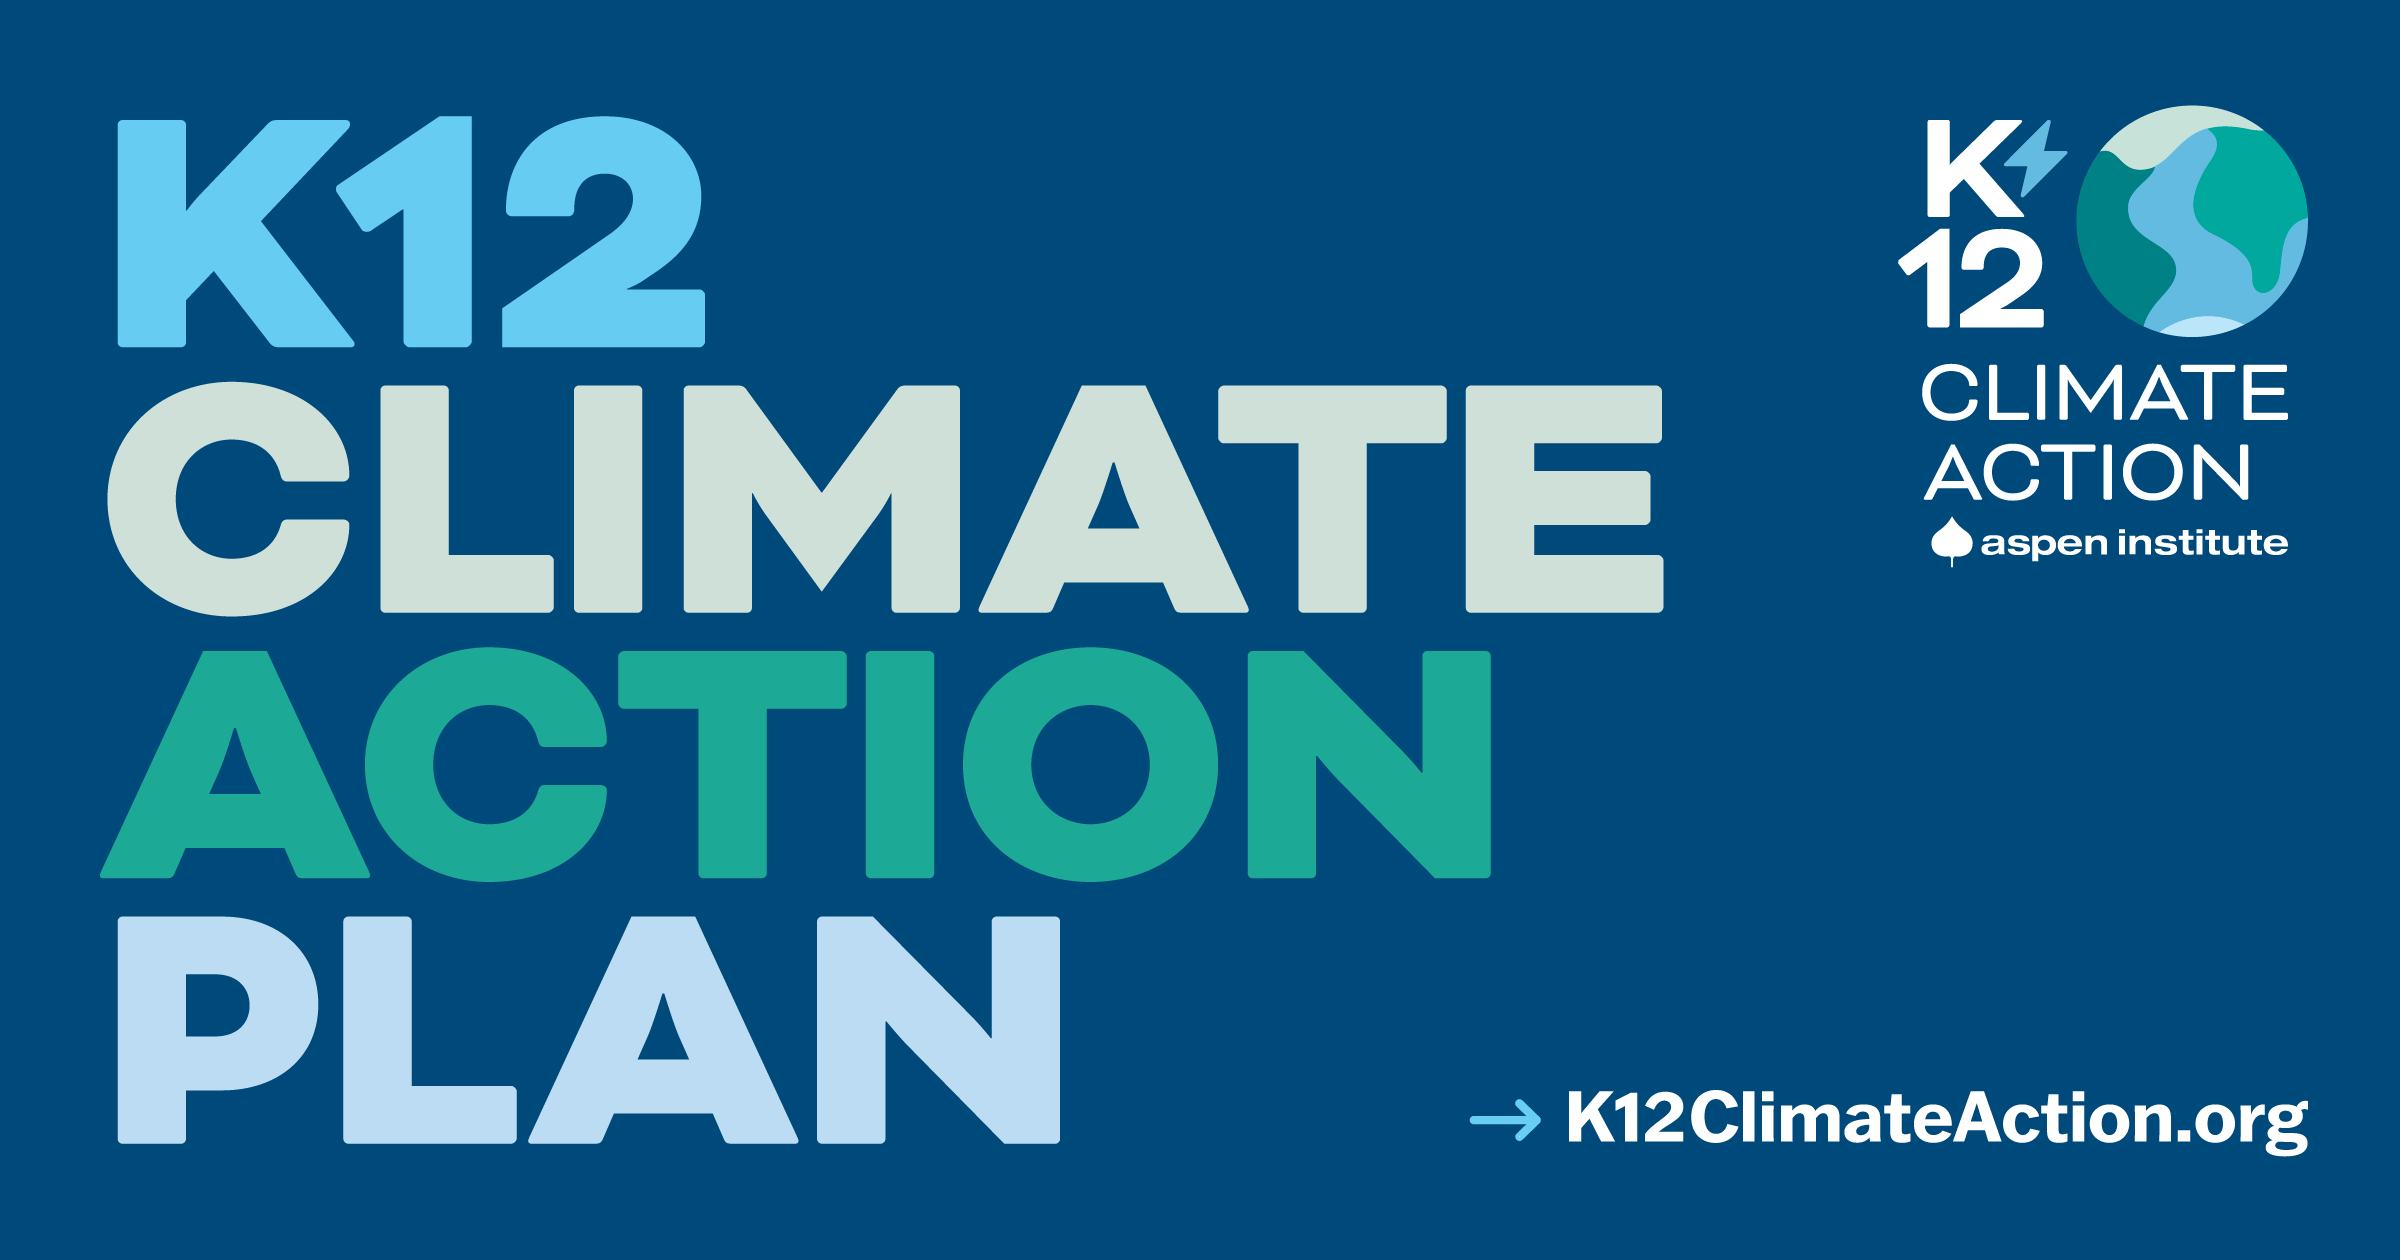 K12 Climate Action Plan Blog Post